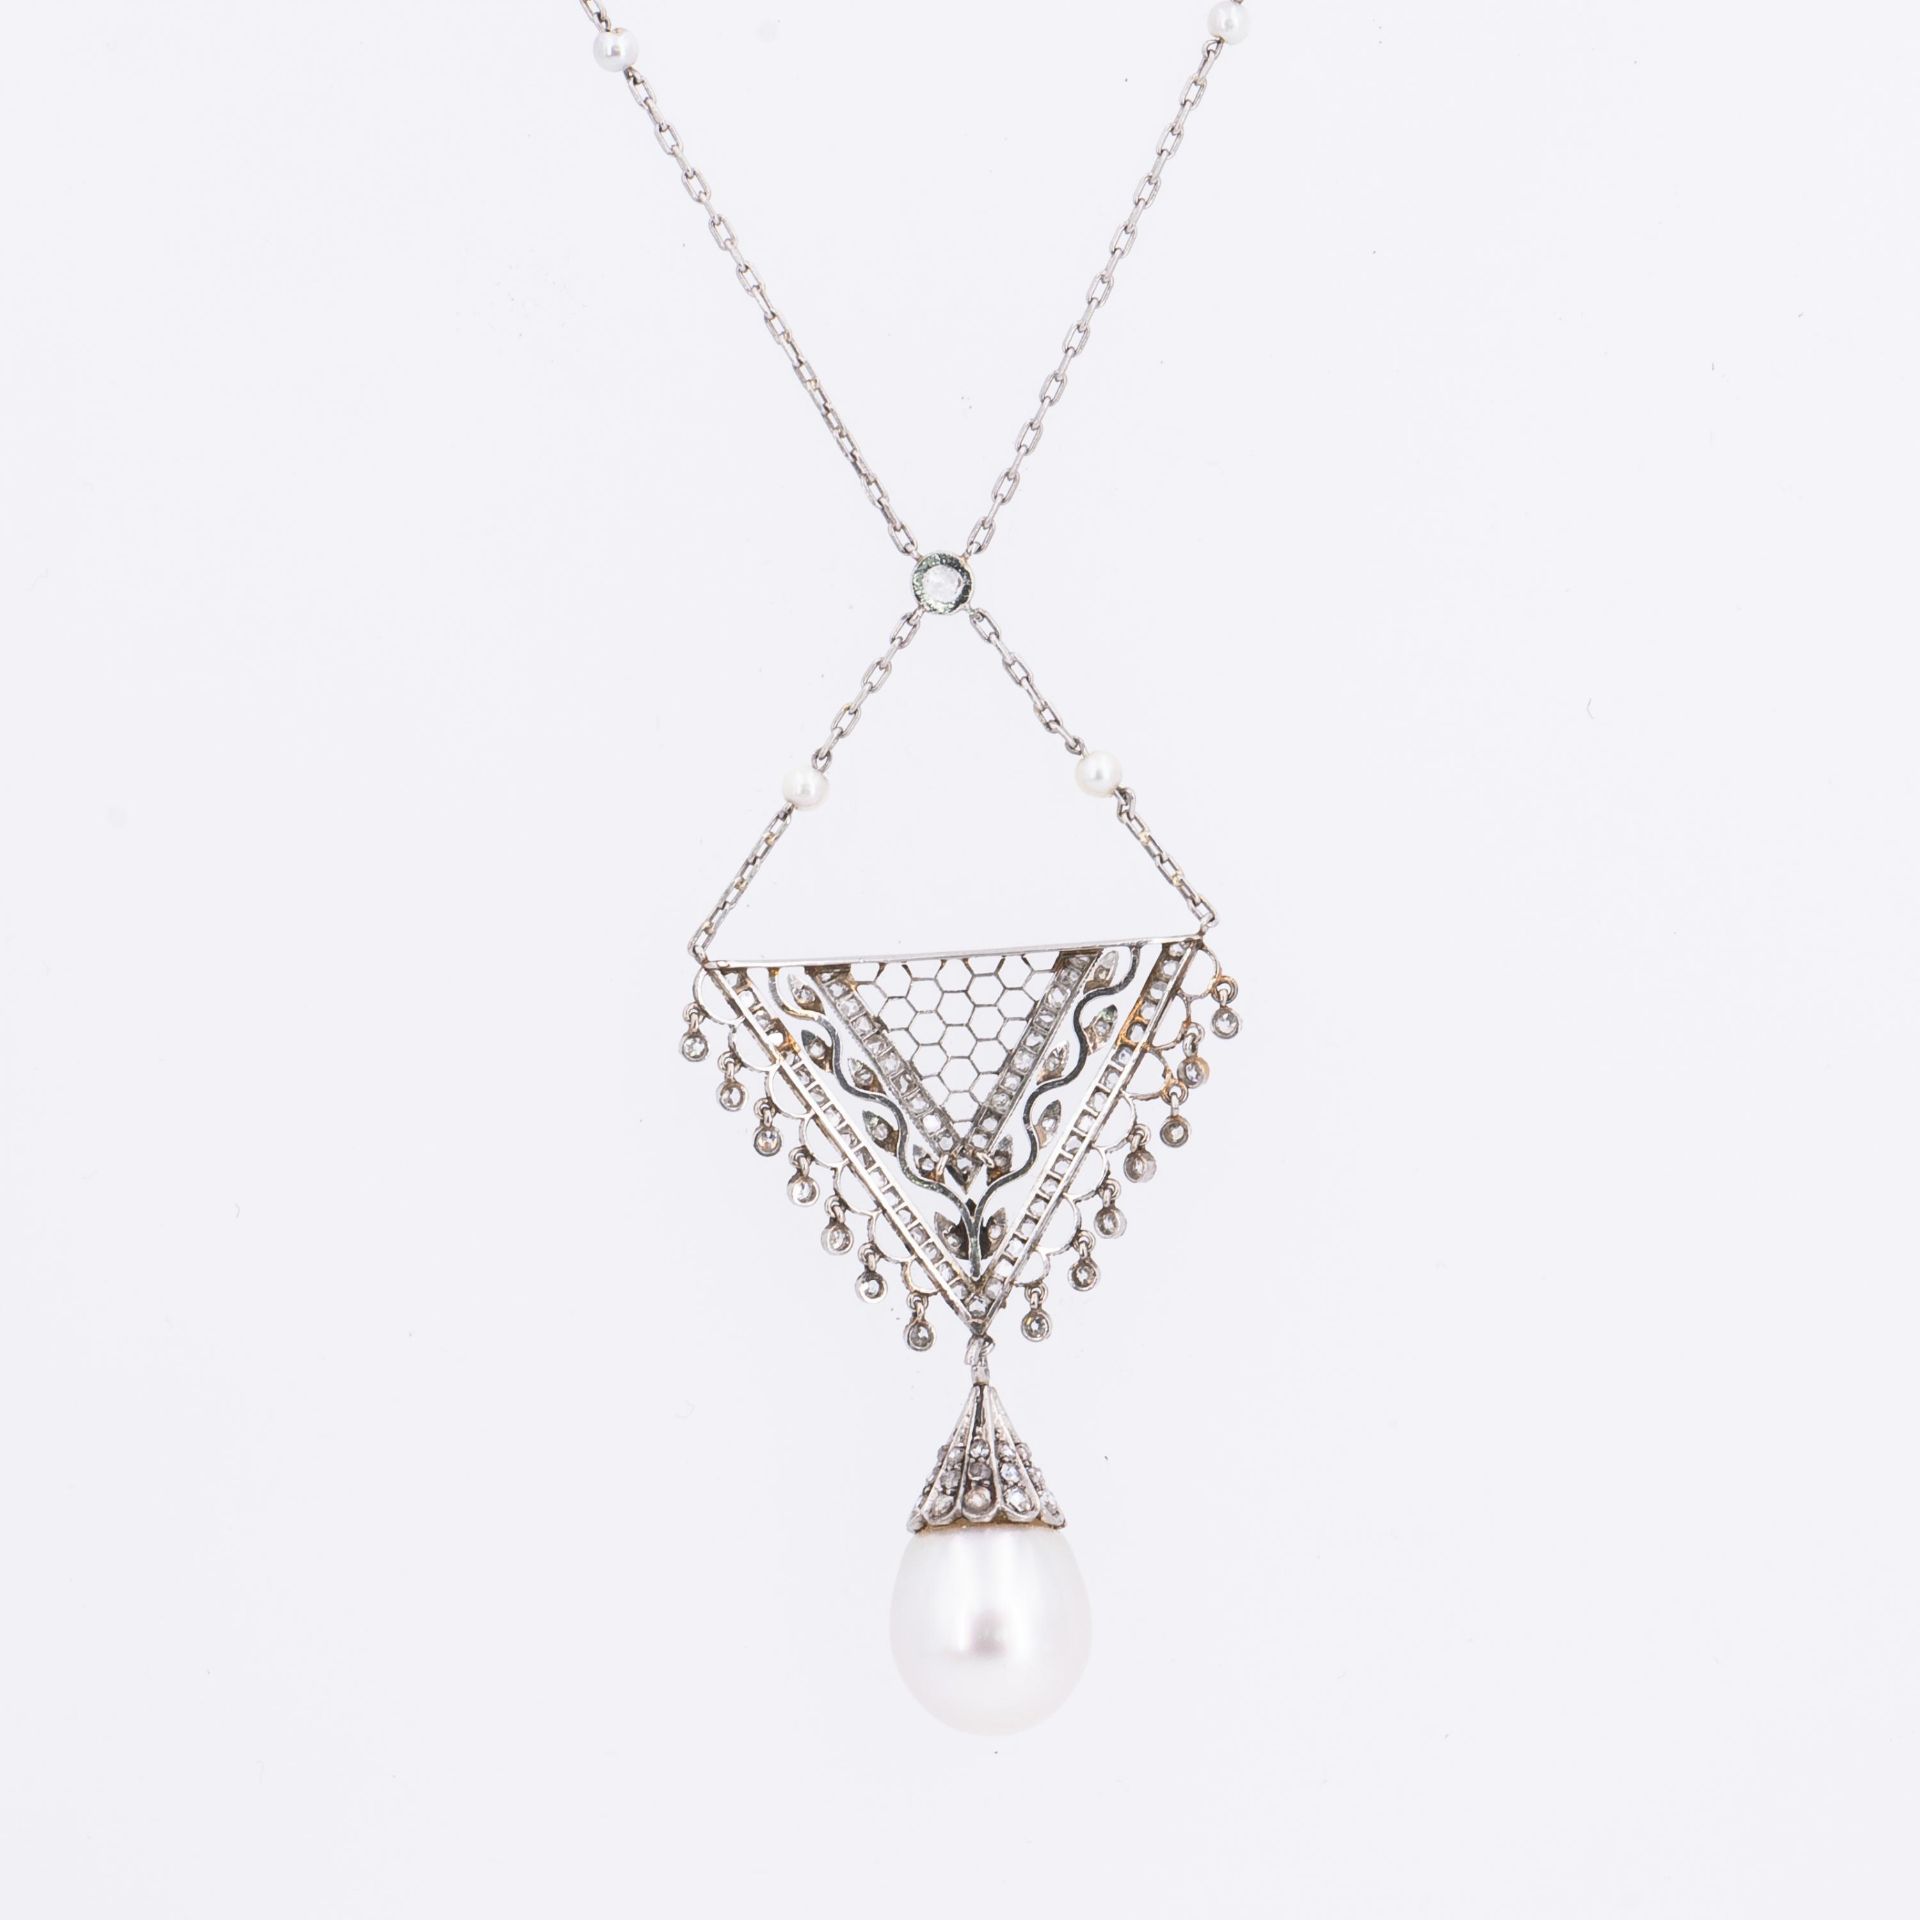 Peal-Diamond-Necklace - Image 2 of 4